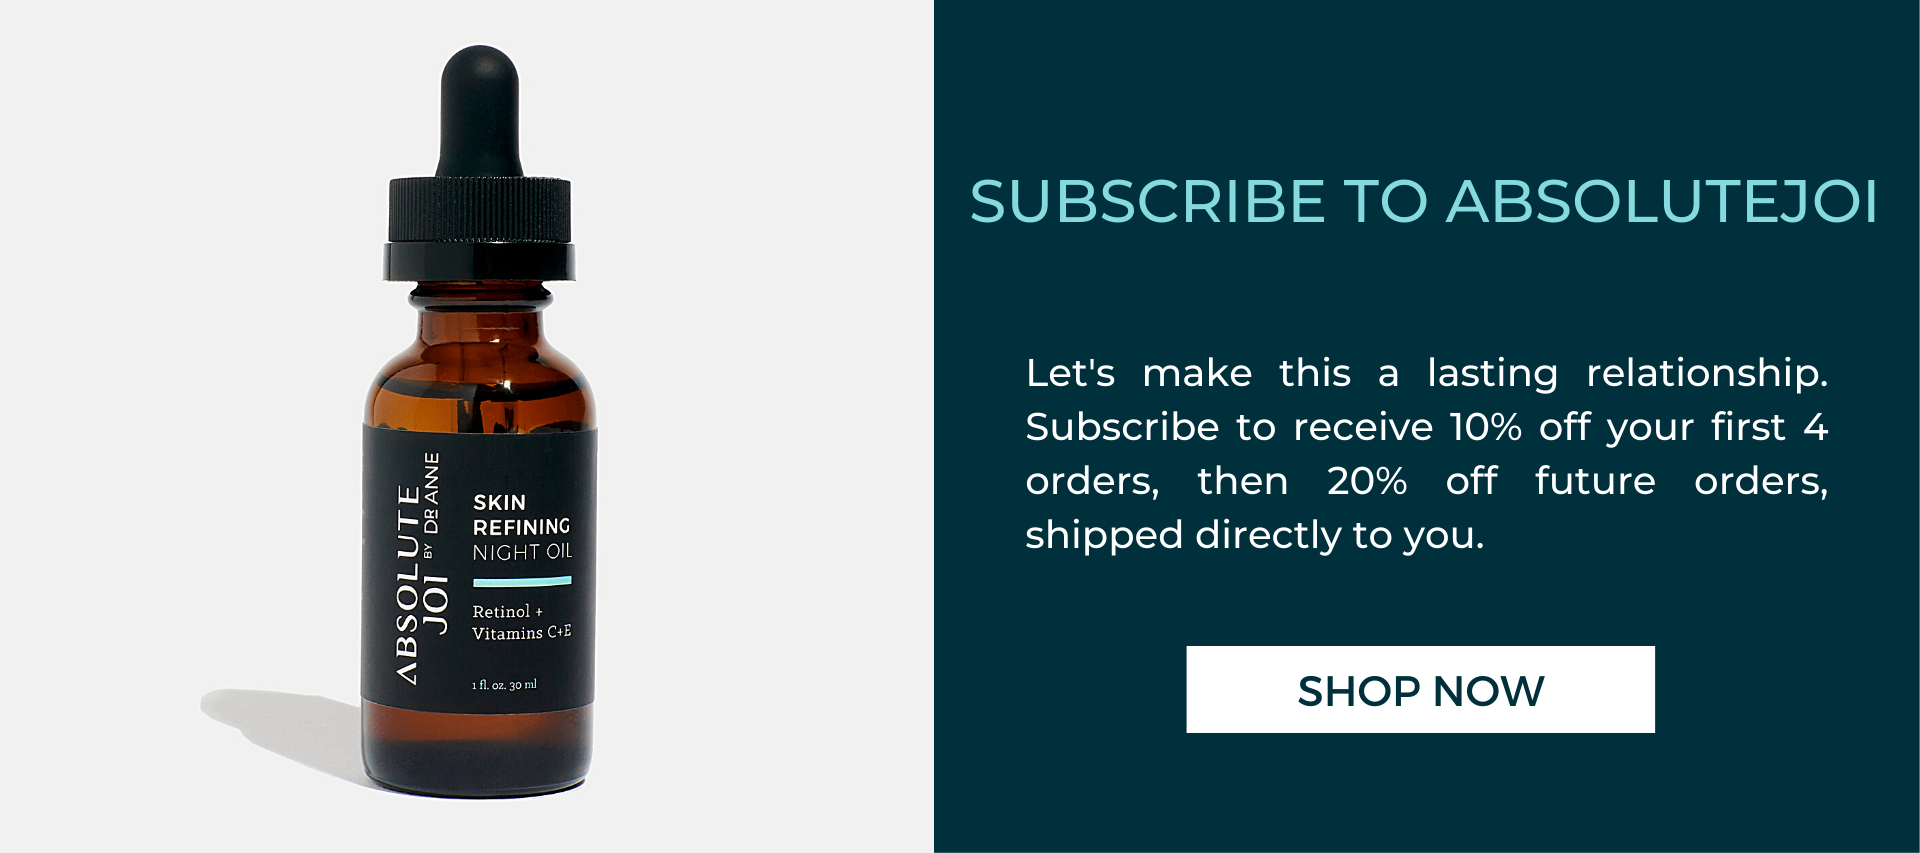 Skin Care Subscription Banner